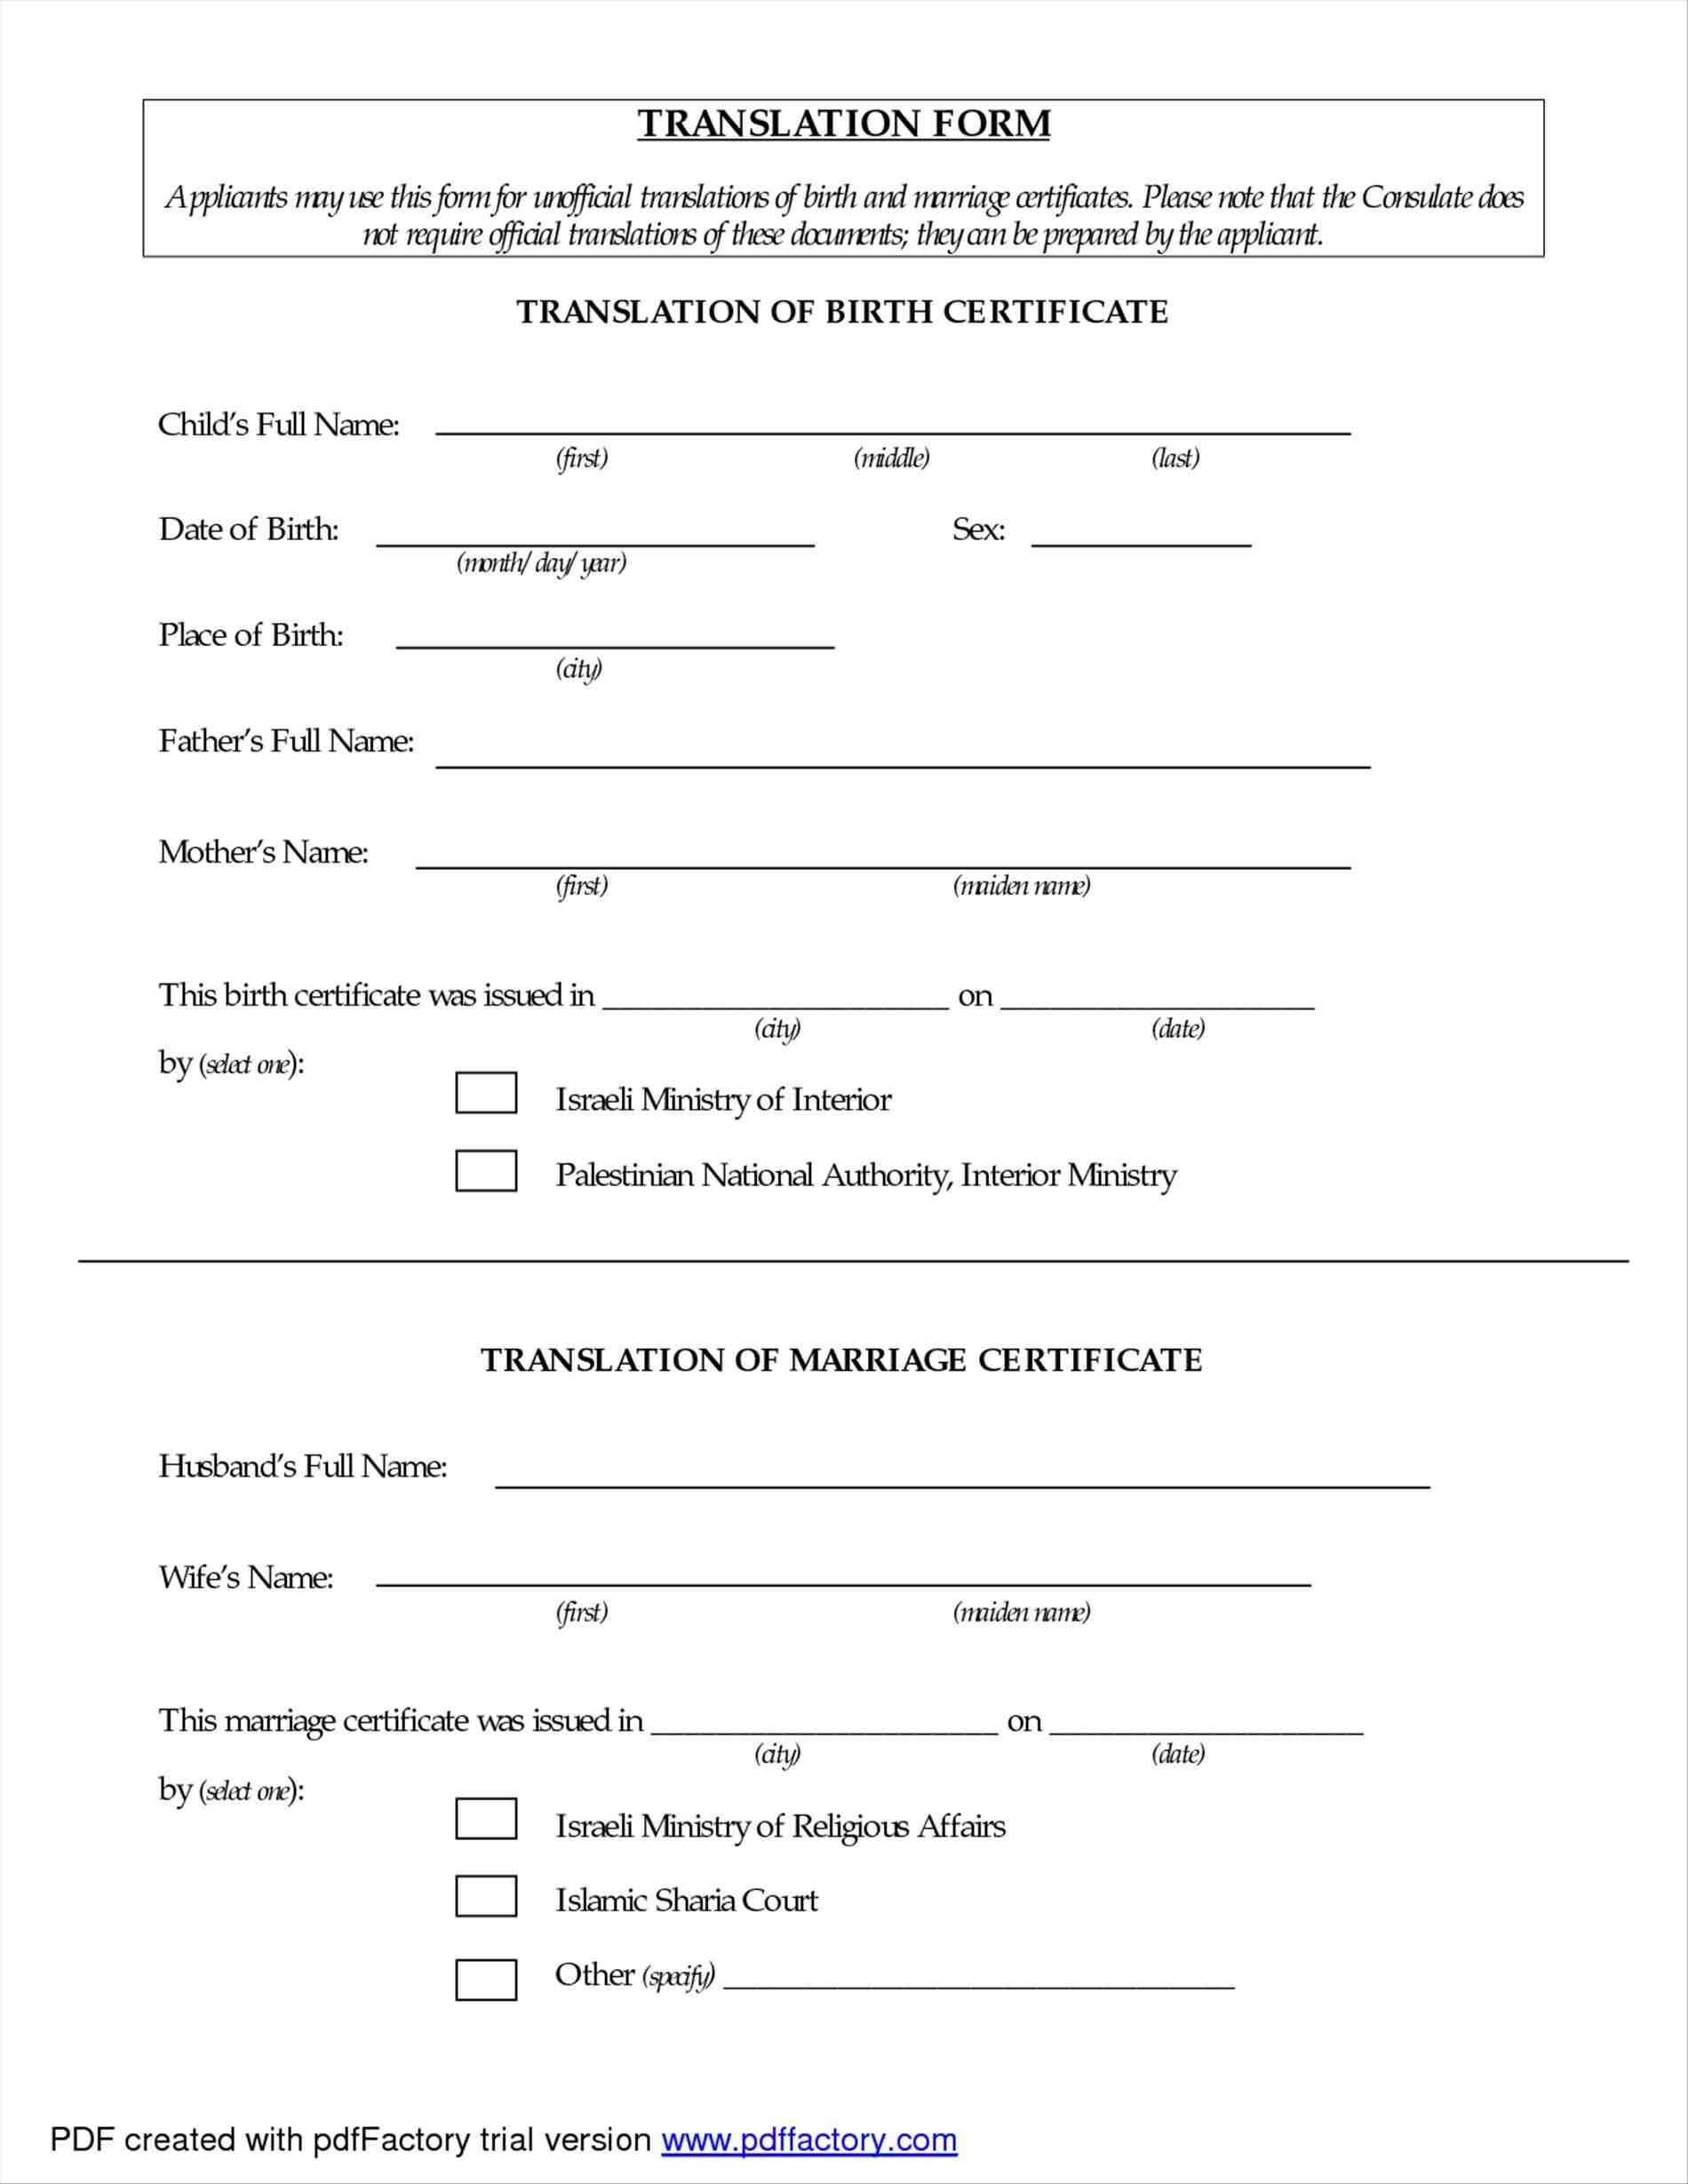 Translate Marriage Certificate From Spanish To English Pertaining To Mexican Marriage Certificate Translation Template